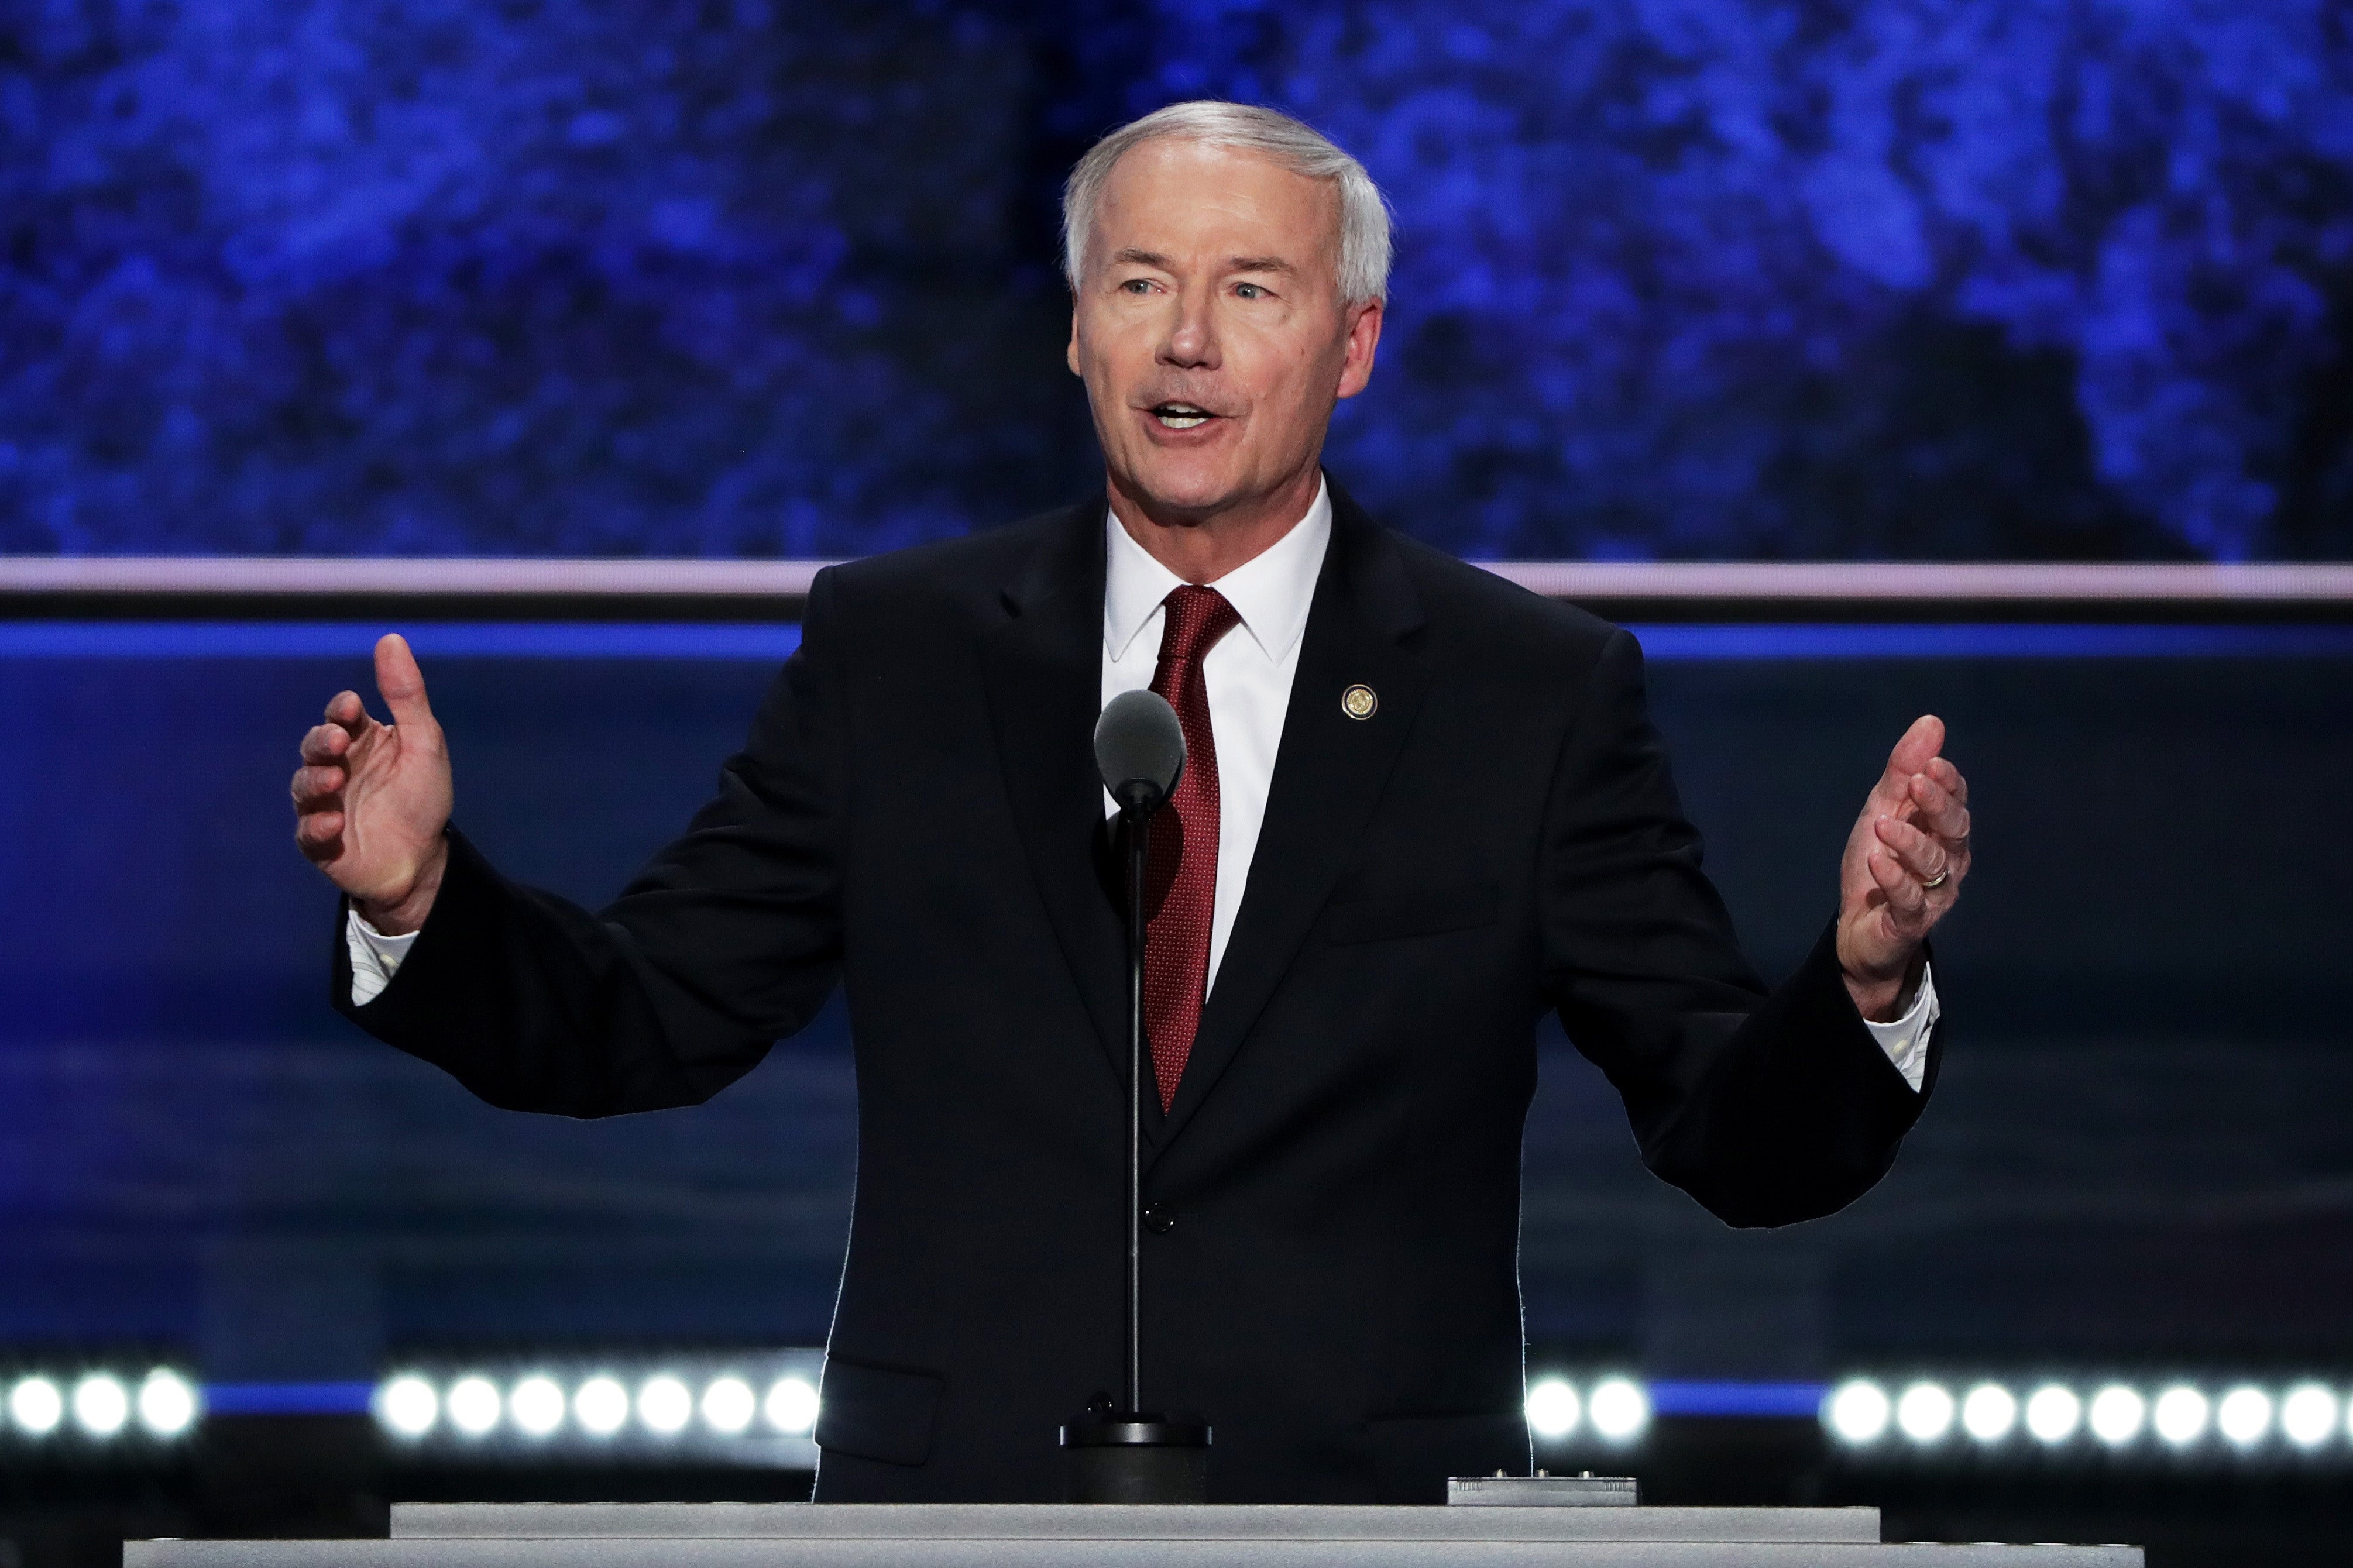 Republican Governor Asa Hutchinson vetoed a bill that would prevent doctors from providing gender-affirming care to transgender minors